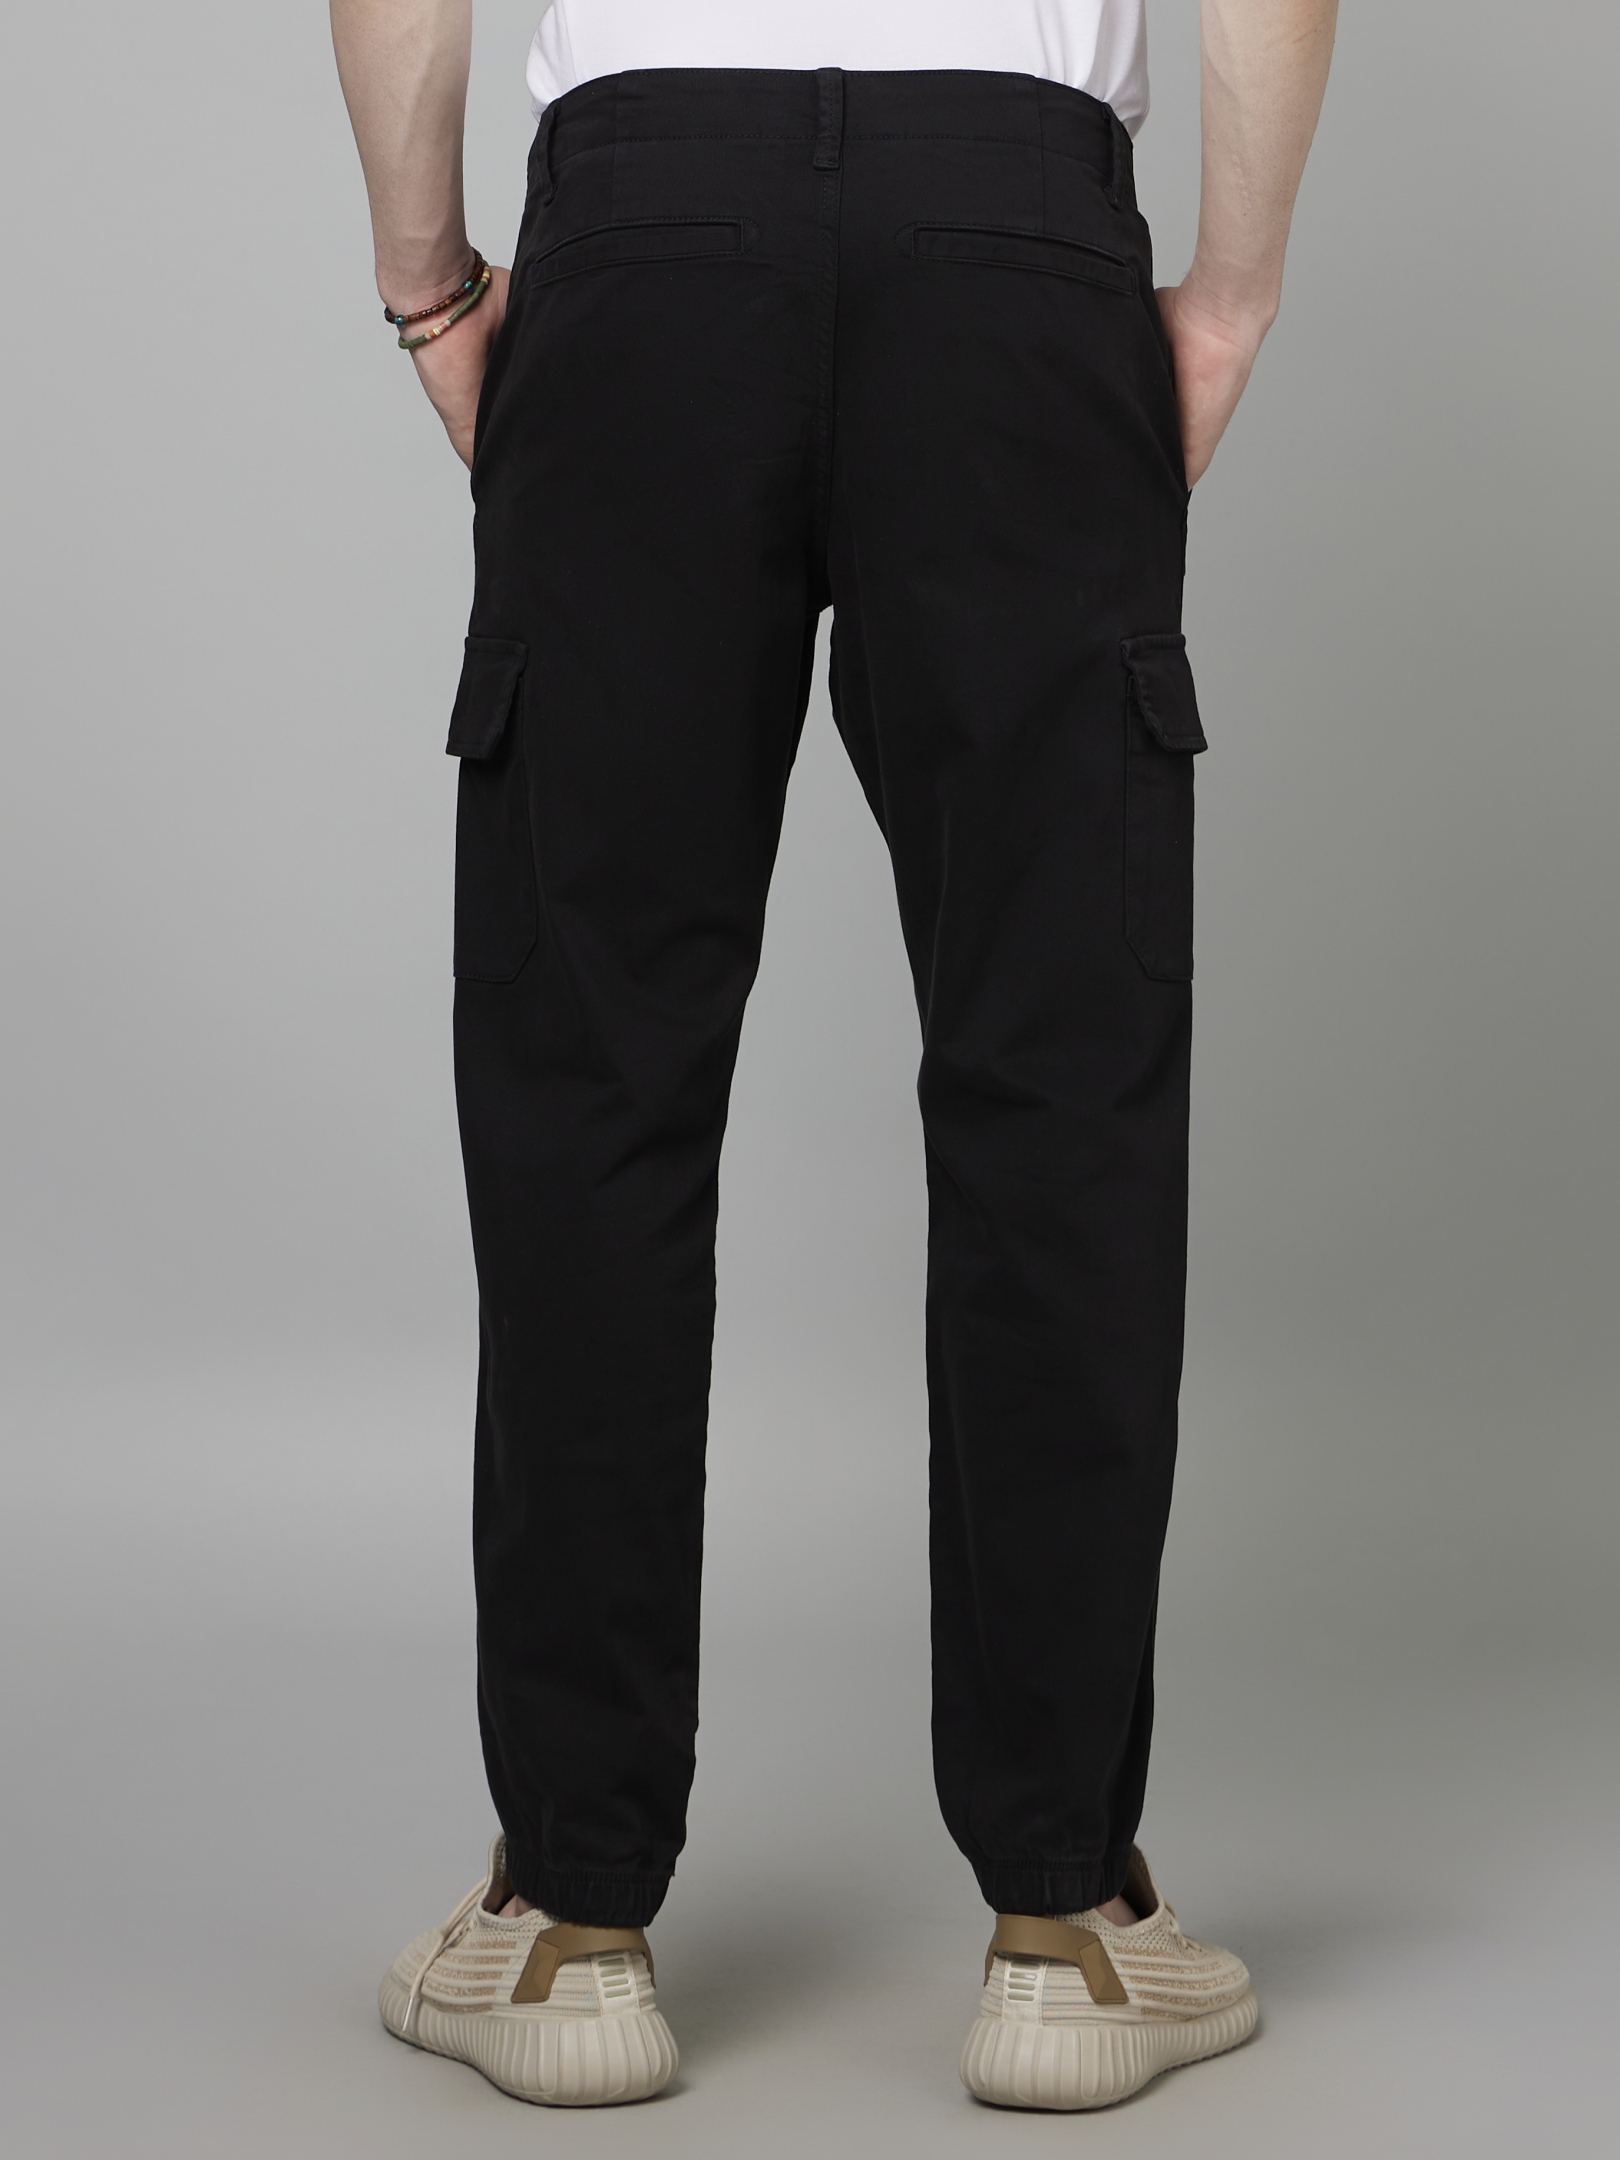 Regular Fit Formal Wear Mens Black Cotton Trouser, 28-36 at Rs 275 in  Ludhiana